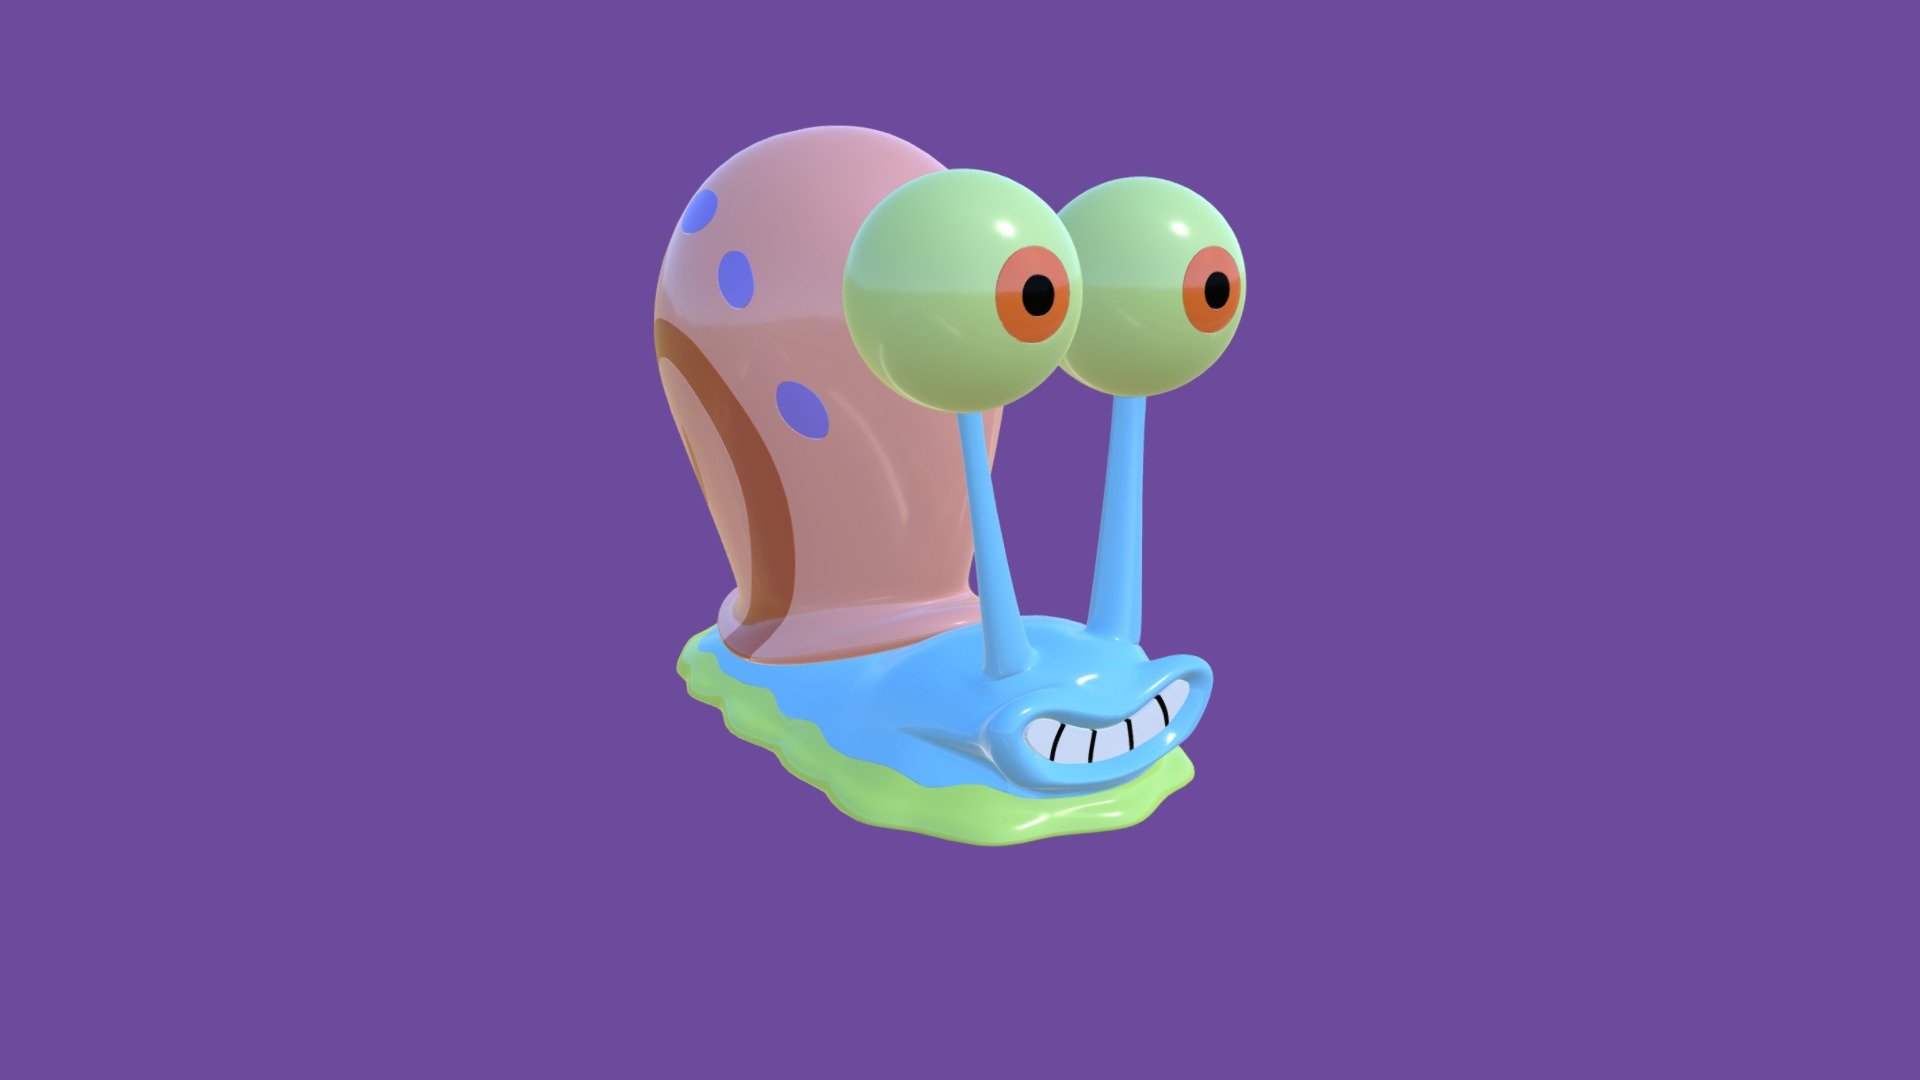 This is a 3d printable model of Gary the snail from Spongebob Squarepants. 
I made it using Fusion 360, and it's printable either as a single body in one colour, a single body in multiple colours (using an MMU) or in multiple parts to be assembled afterwards, allowing it to be printed in full colour using any 3d printer. 

The purchase includes a single body STL, 3MF, a multi part STL, and the Fusion 360 file. The multi part model has been created with clearances of 0.2mm to allow for easier part assembly. Tested using a Prusa MK2. If your printer needs a larger clearance value, you can load up the Fusion file, and change the value of the parameter, which will adjust all the clearances at once.

Below are some pictures of the printed assembled model c/o my friend Mia (@dasmia3 on twitter.) The blue body was printed using a colour changing filament, hence the different colour in the 3rd picture


 - Gary the snail - Buy Royalty Free 3D model by welbot 3d model